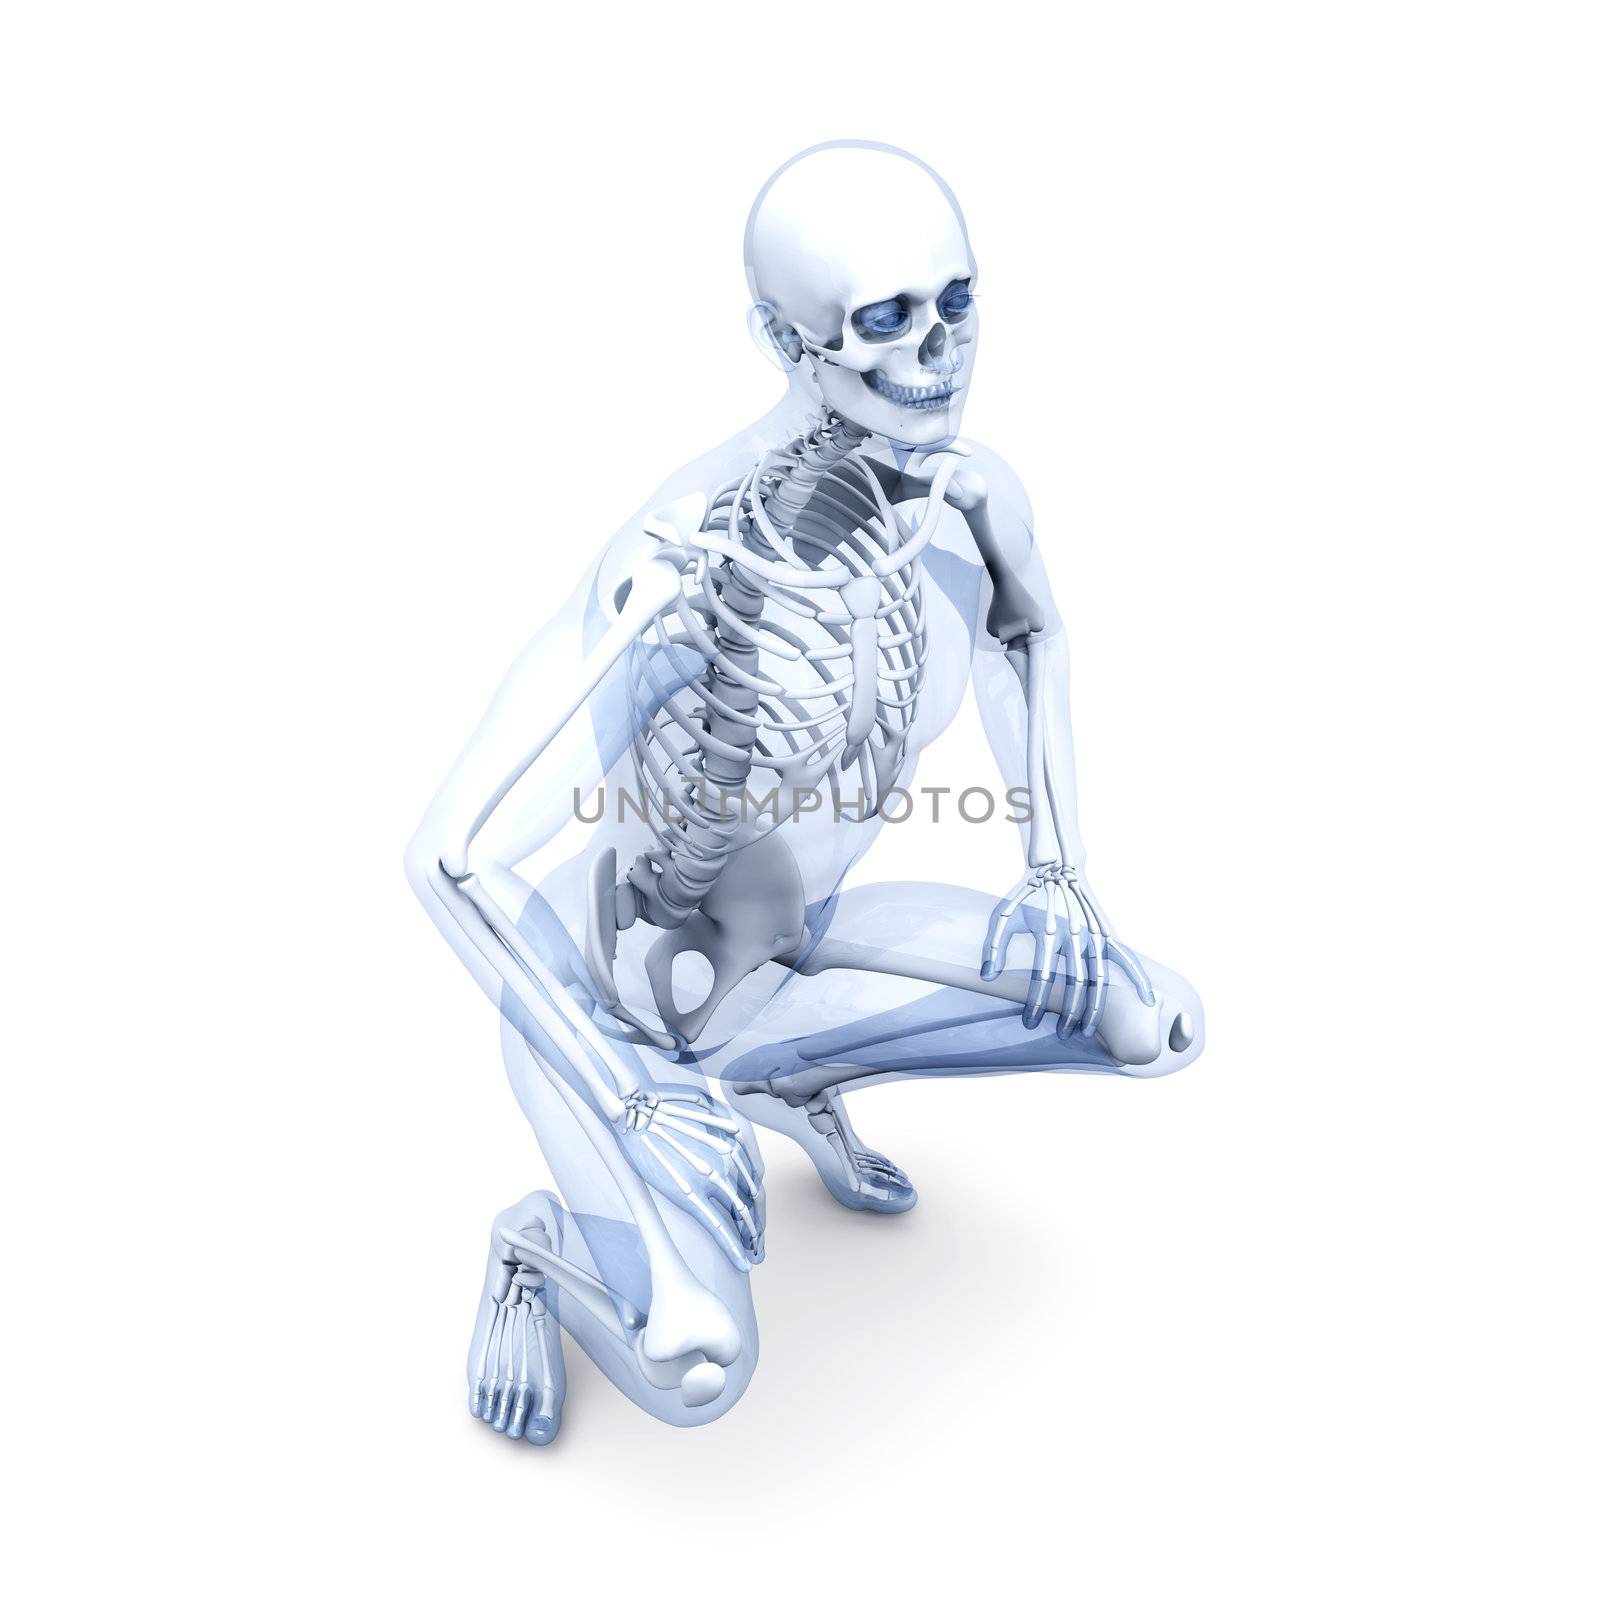 Anatomy Visualization by Spectral